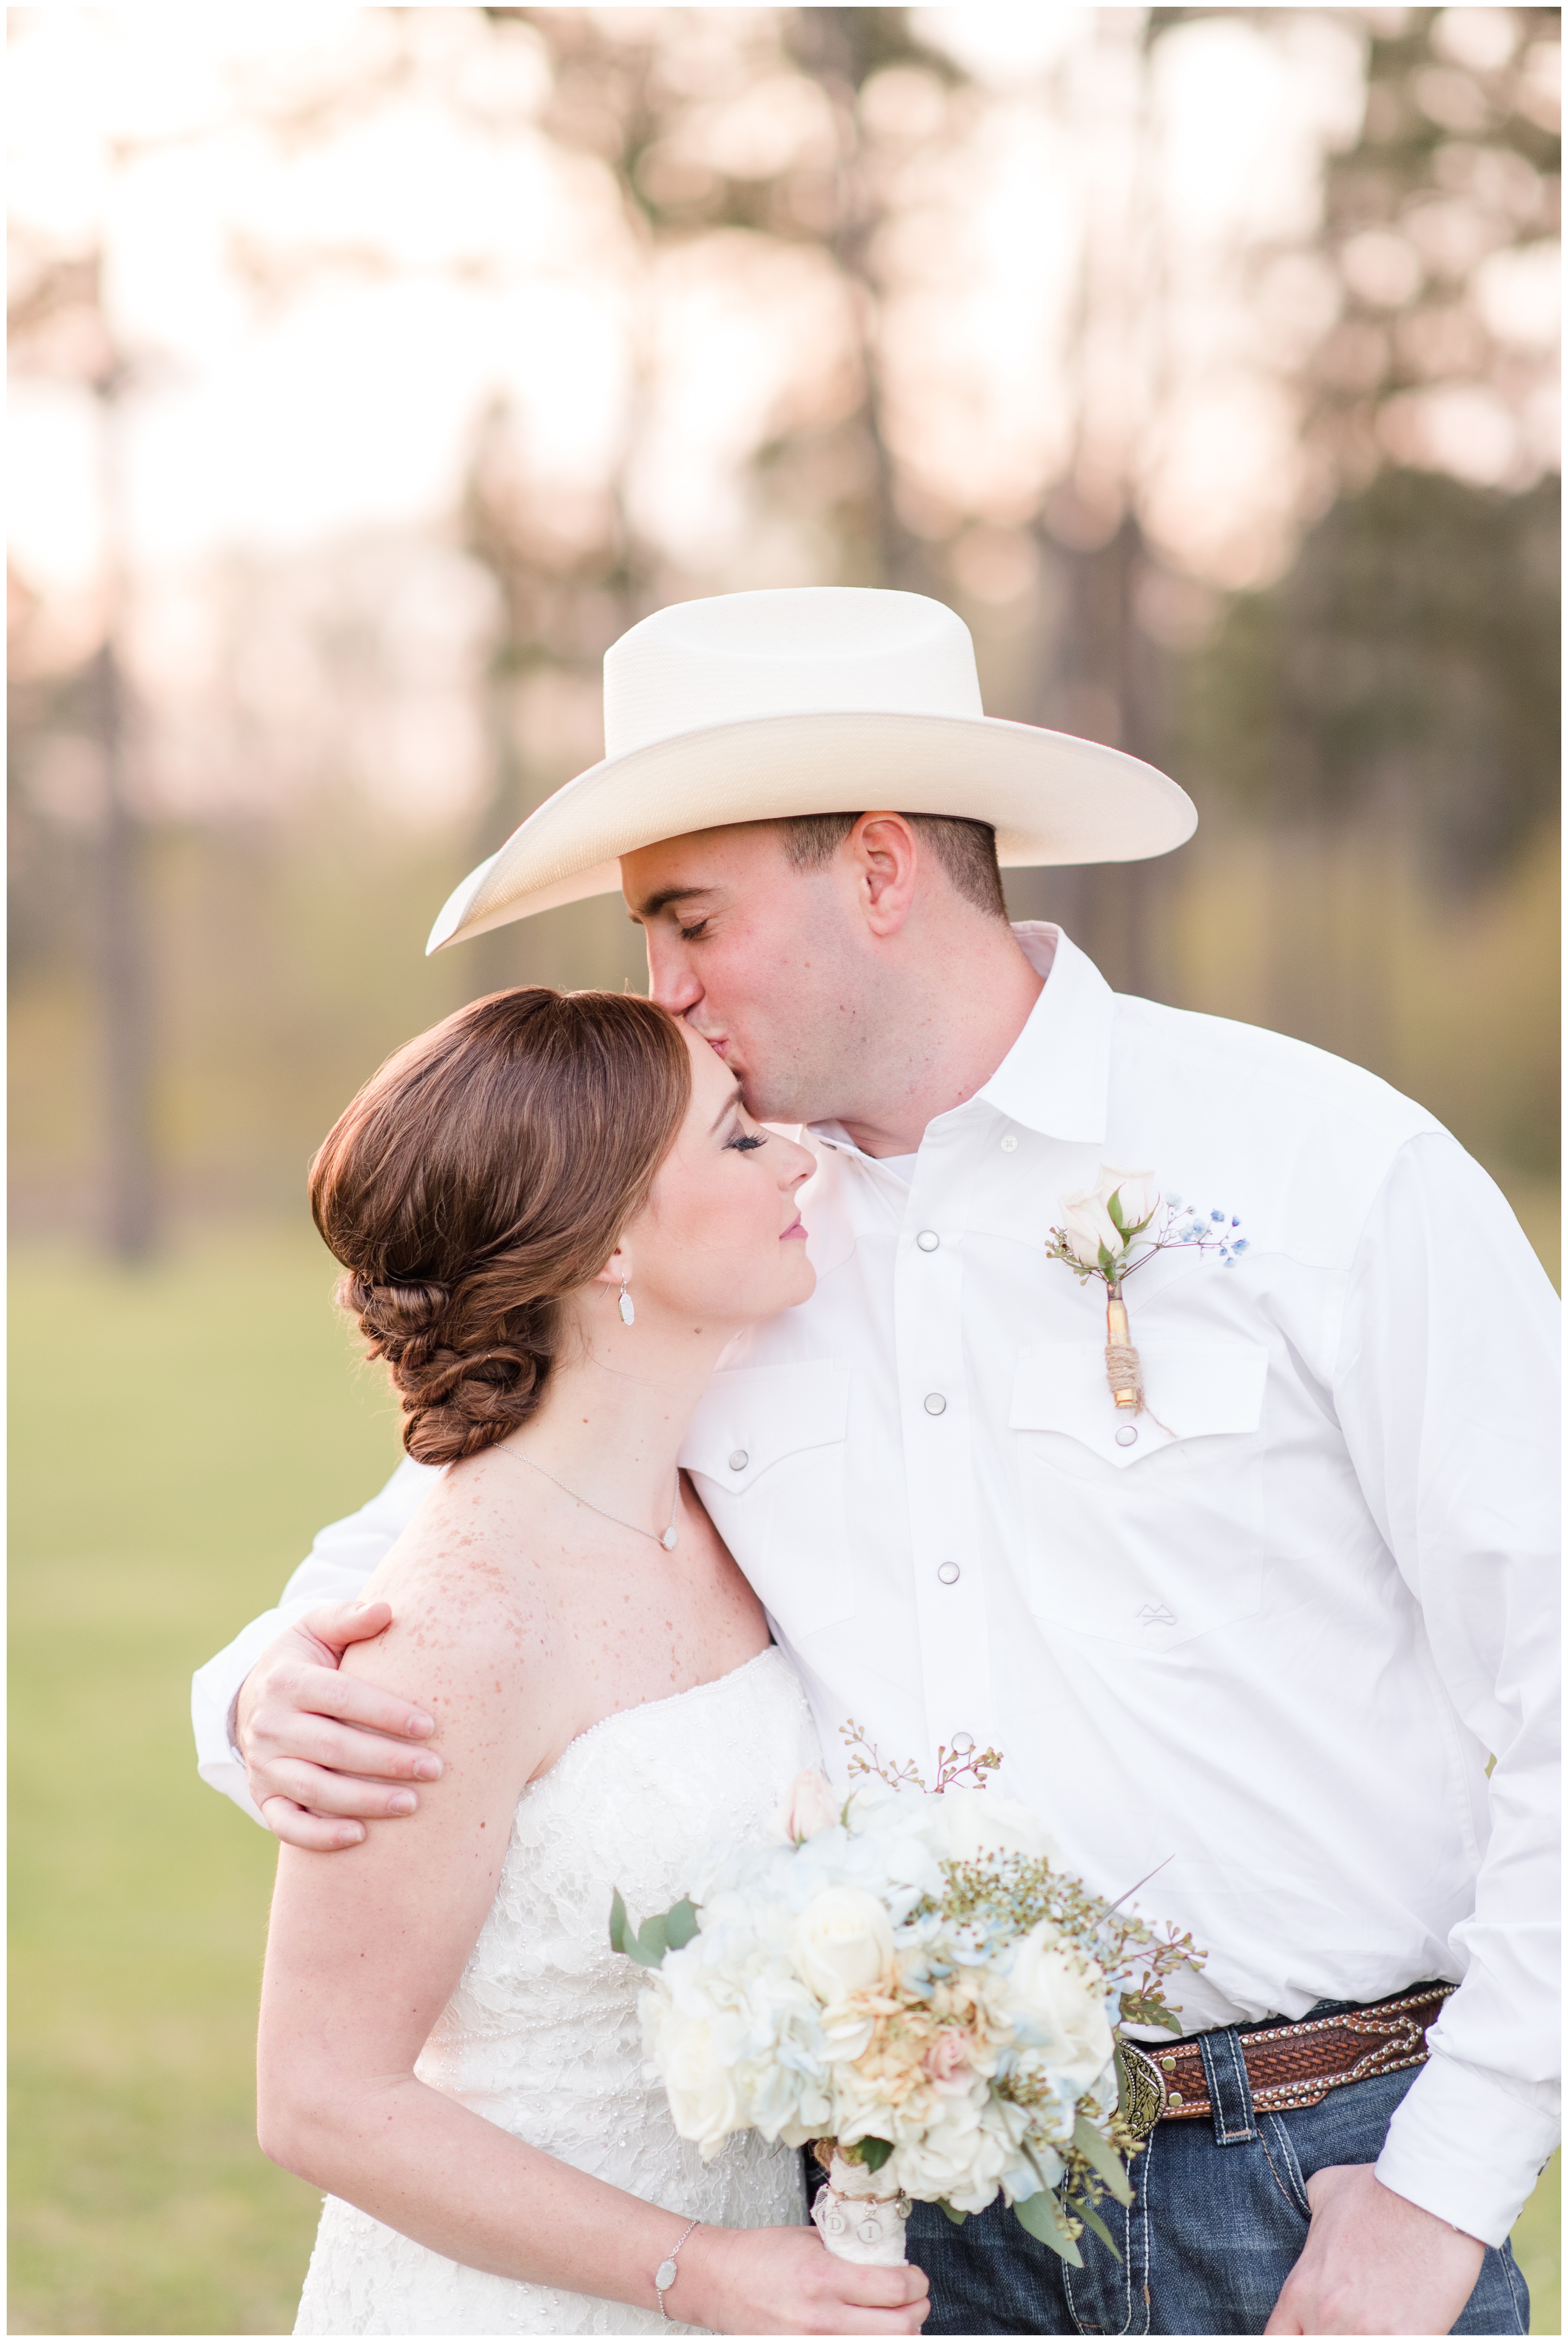 The Barn at Four Pines Wedding in Crosby TX - Kevin and Sammi_0361